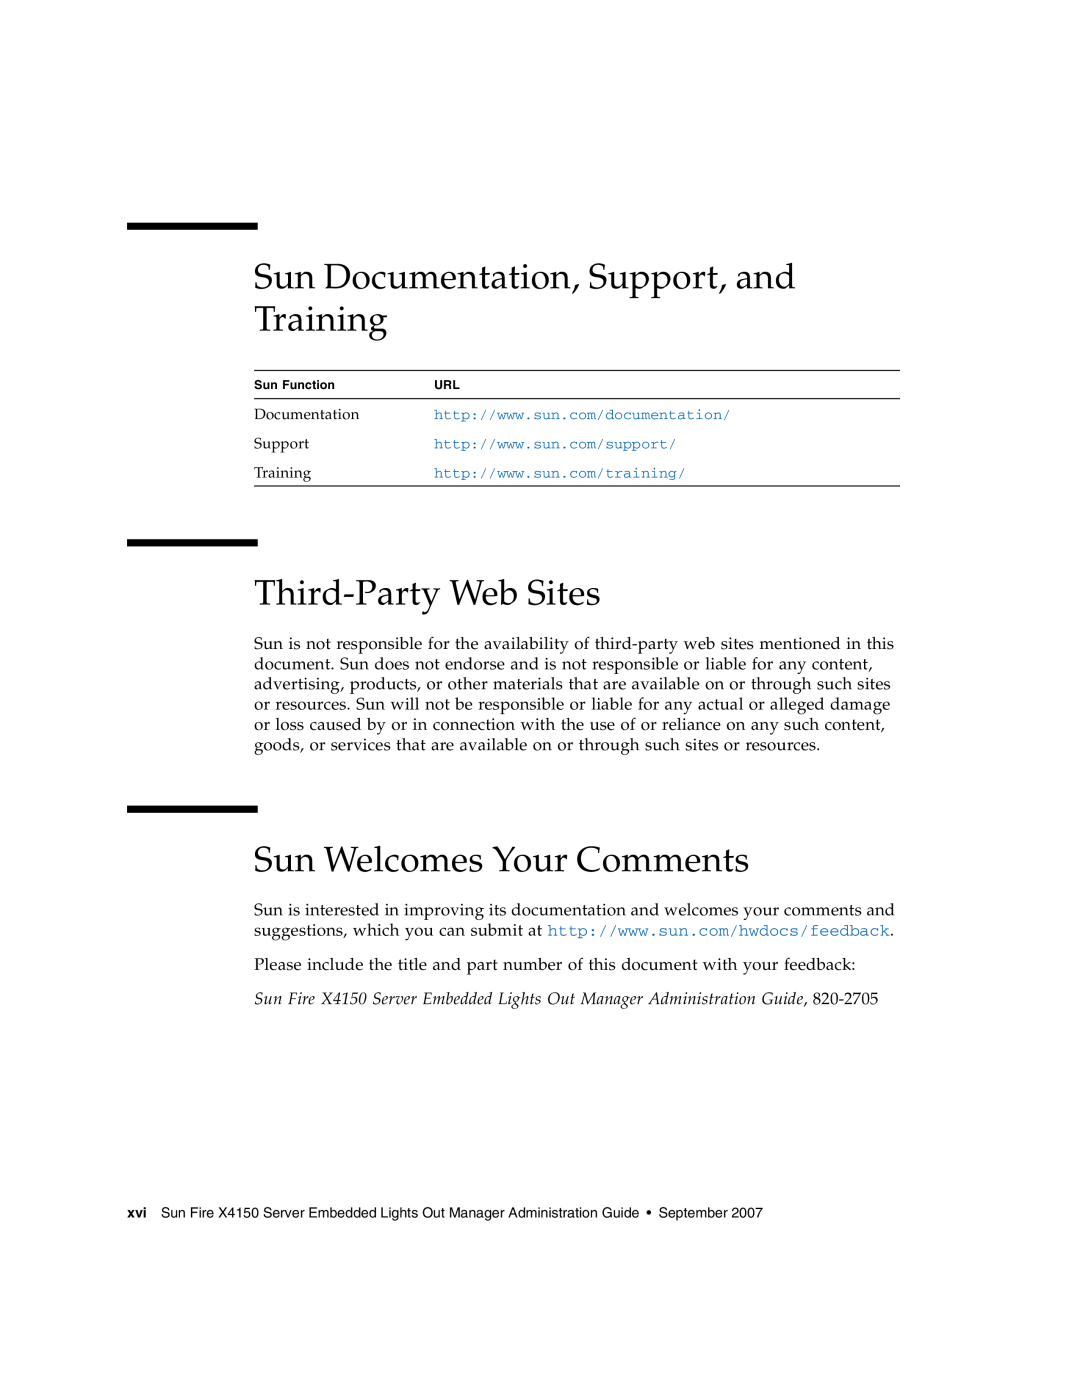 Sun Microsystems X4150 manual Sun Documentation, Support, and Training, Third-Party Web Sites, Sun Welcomes Your Comments 